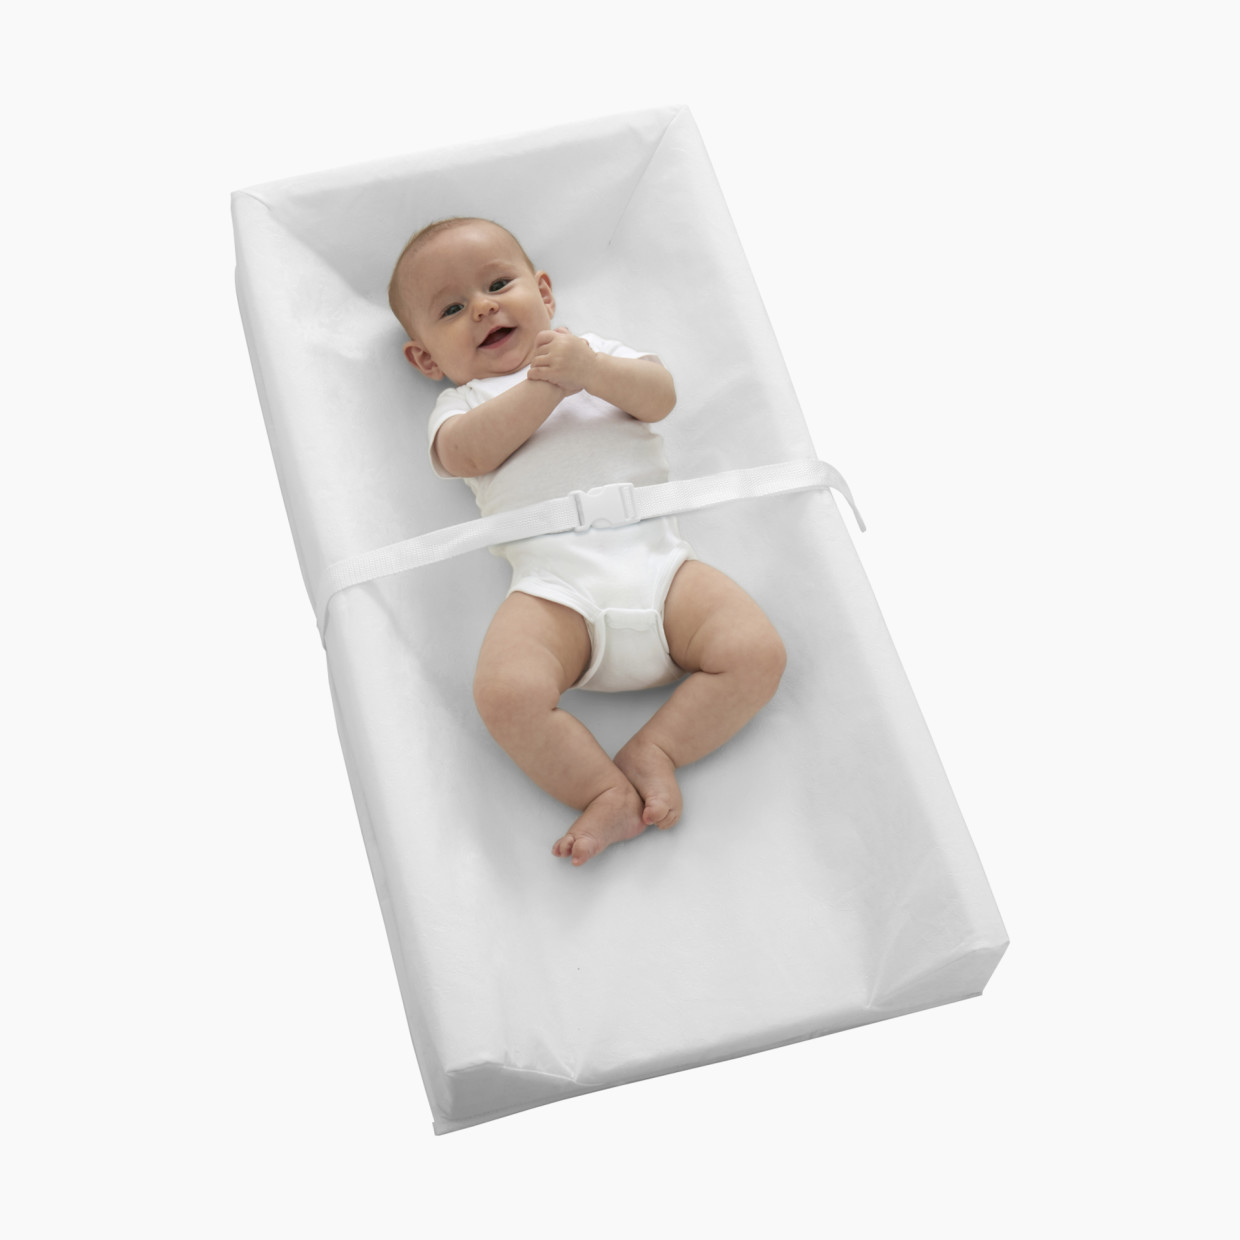 Sealy Soybean Comfort 3-Sided Contoured Diaper Changing Pad - White Peva.